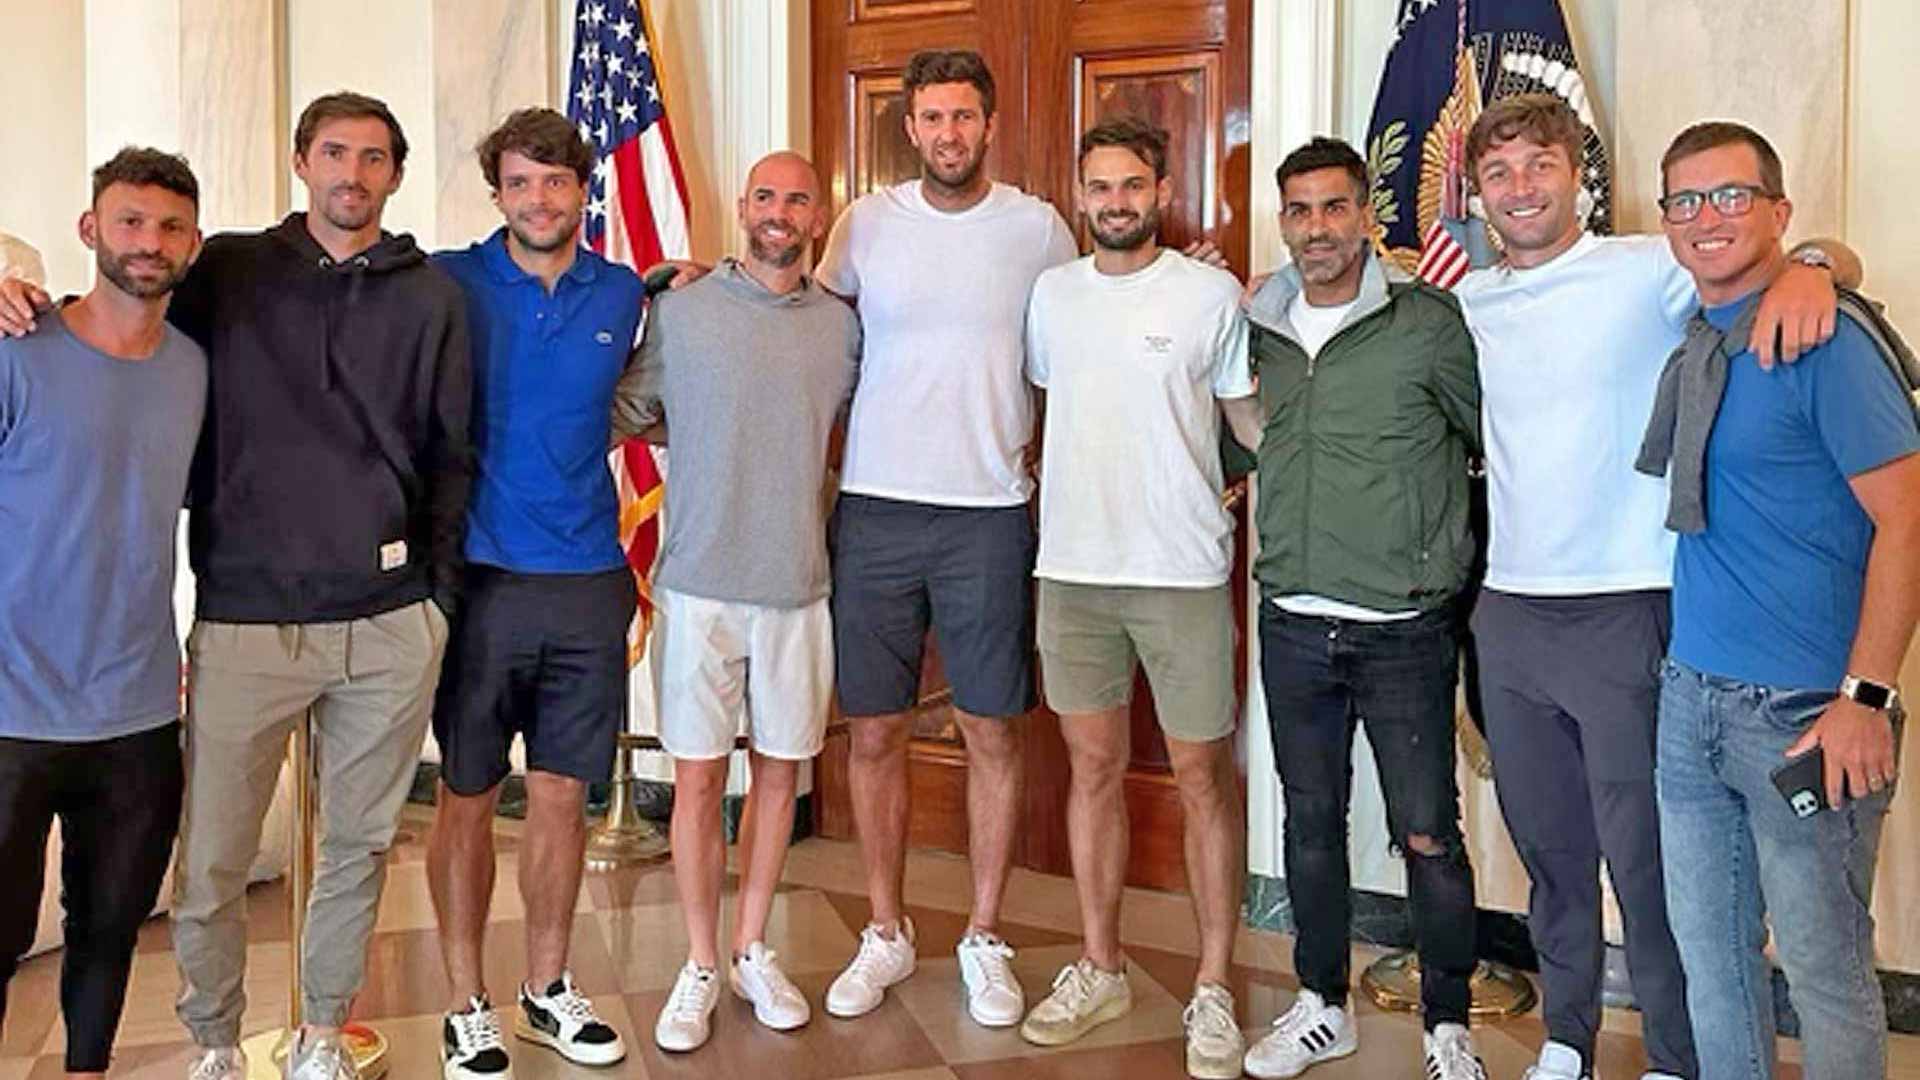 Andres Molteni, Gregoire Barrere, Adrian Mannarino, Fabrice Martin, Hugo Nys, Maximo Gonzalez and Liam Broady visit the White House.